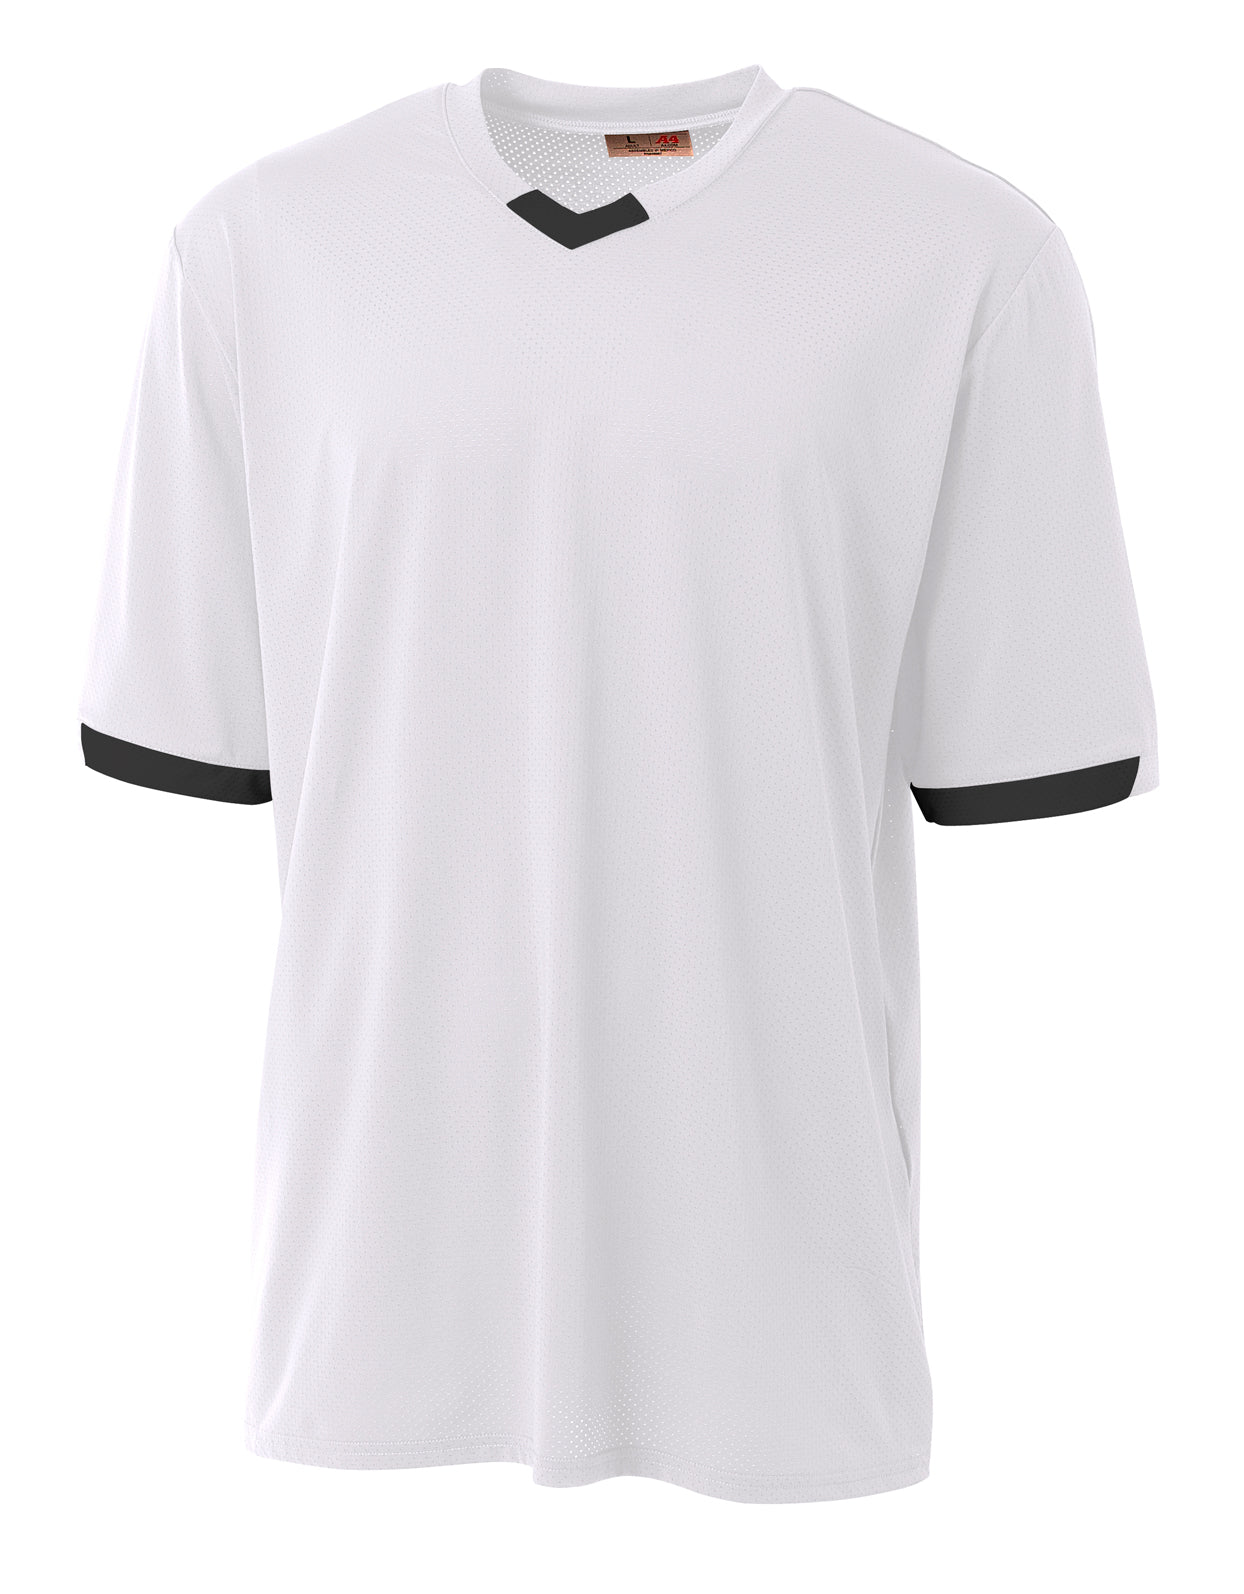 Source Mesh Full Button Piped Baseball Jersey White Plain Baseball Jersey  Wholesale Blank Baseball Jersey OEM on m.